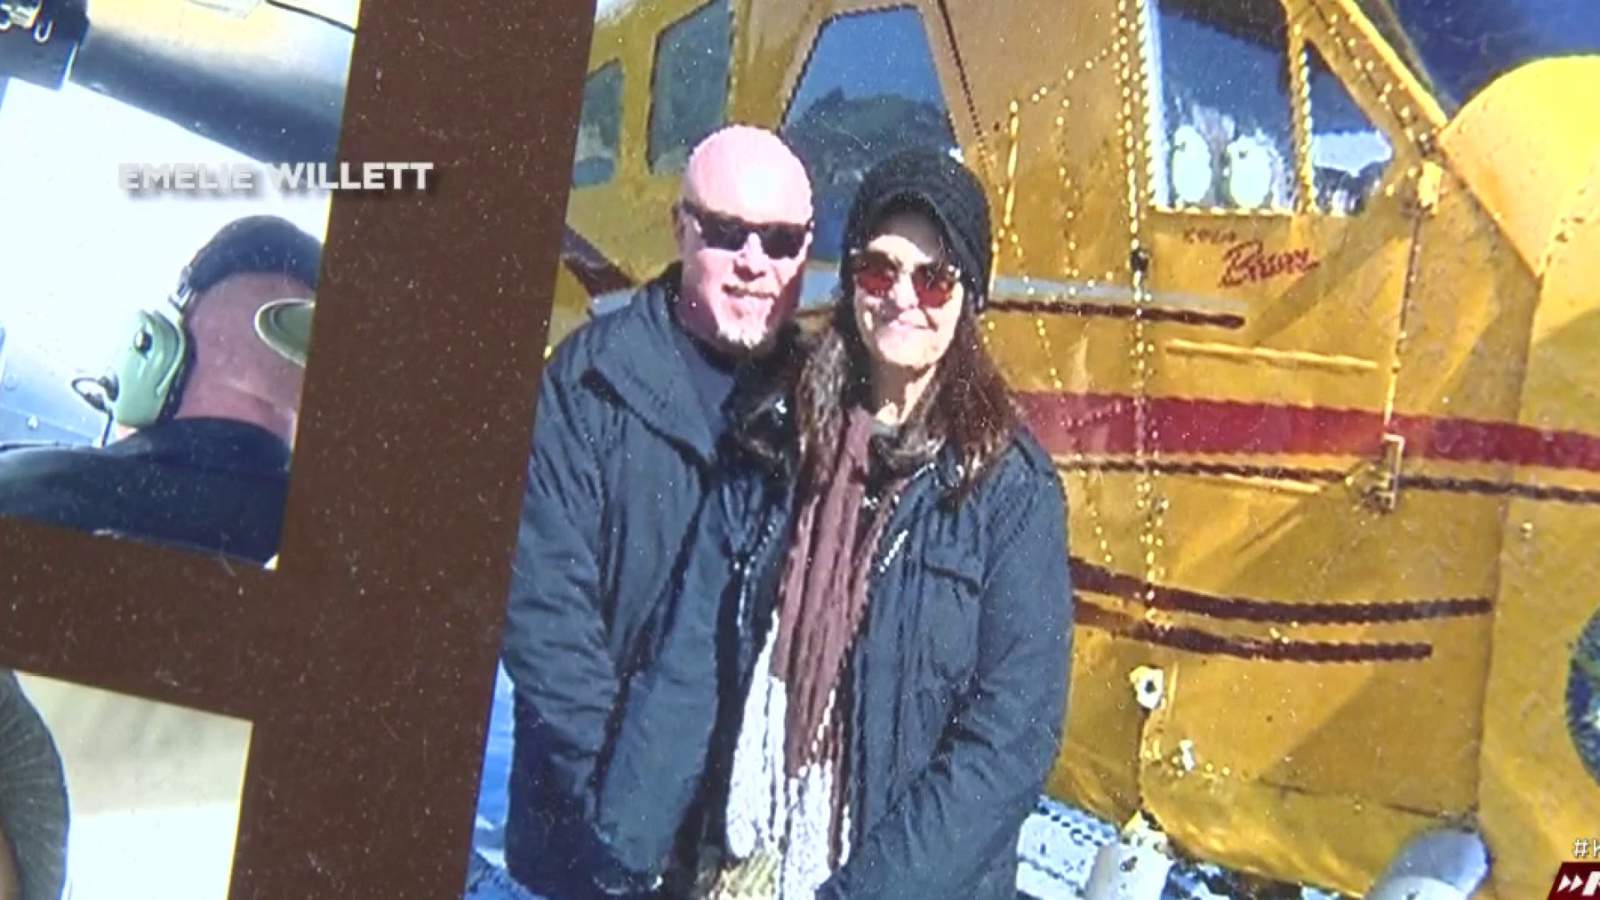 Widow of man killed in South Side plane crash mourns loss of her late husband